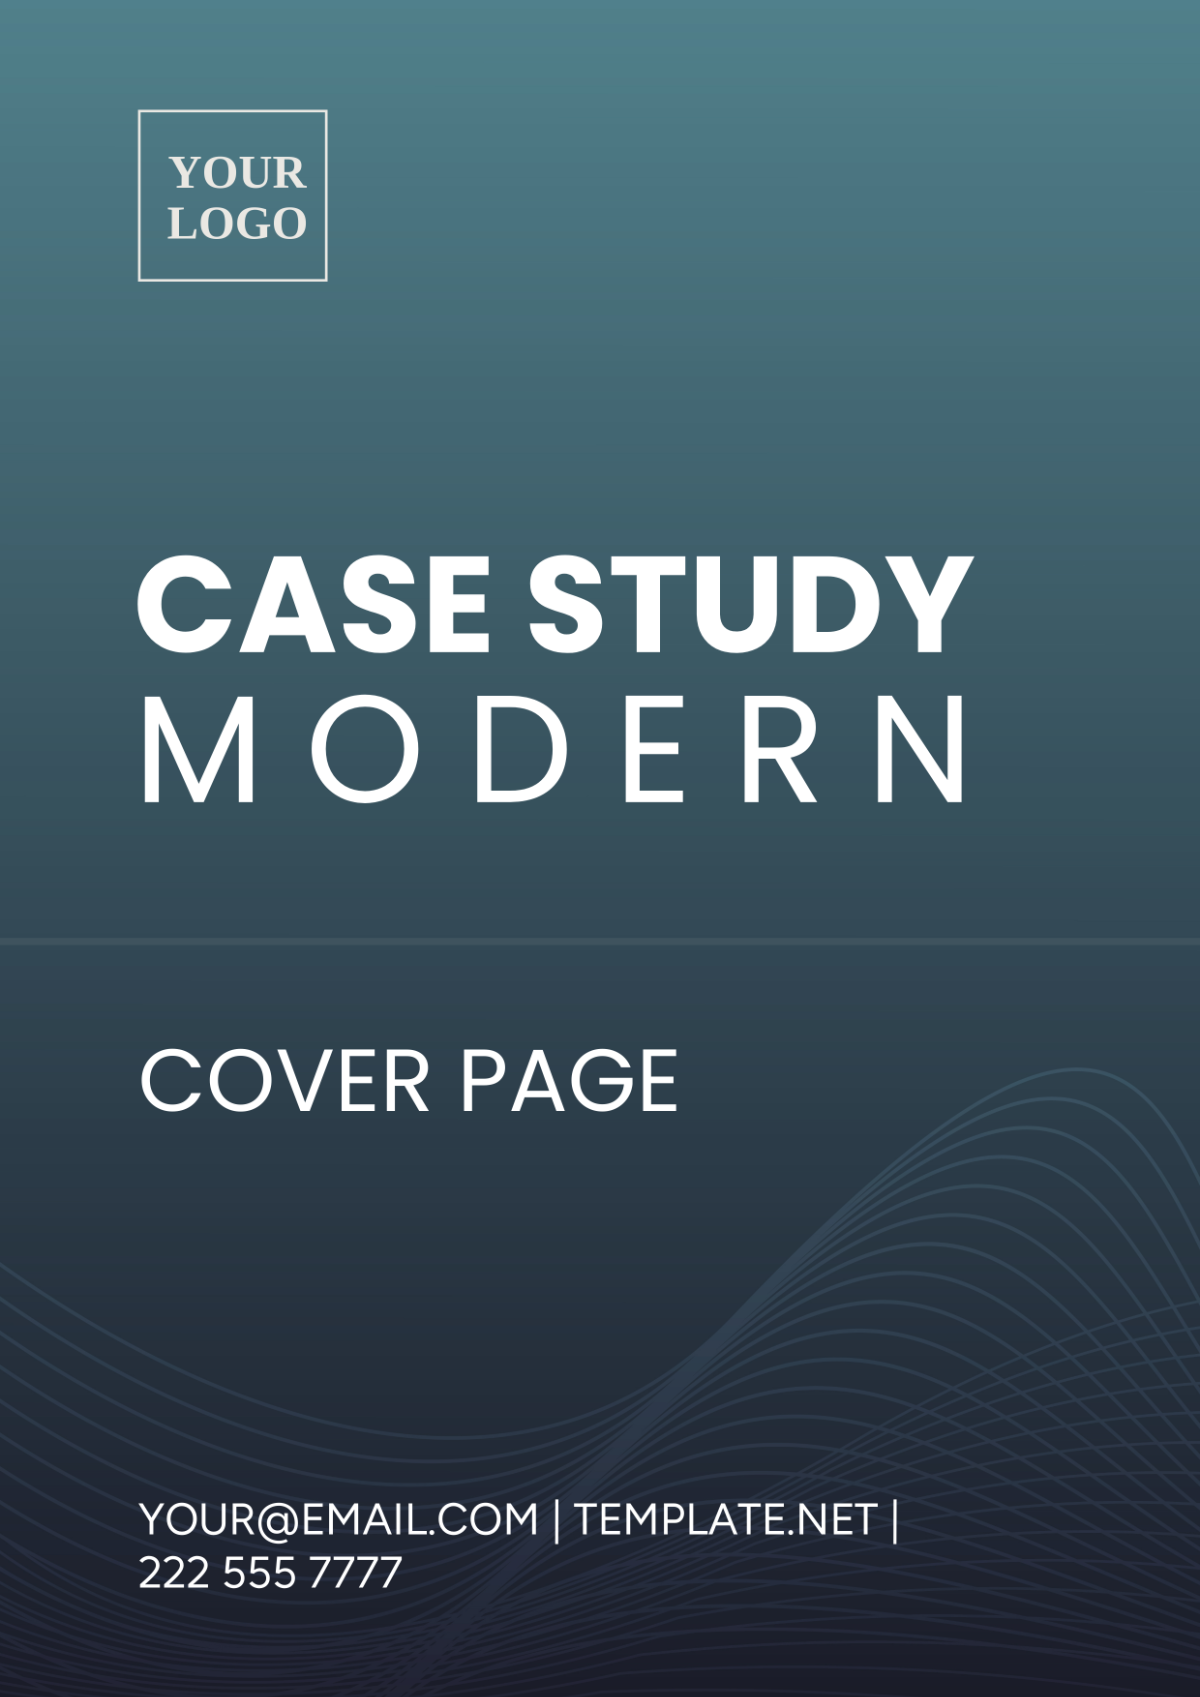 Case Study Modern Cover Page